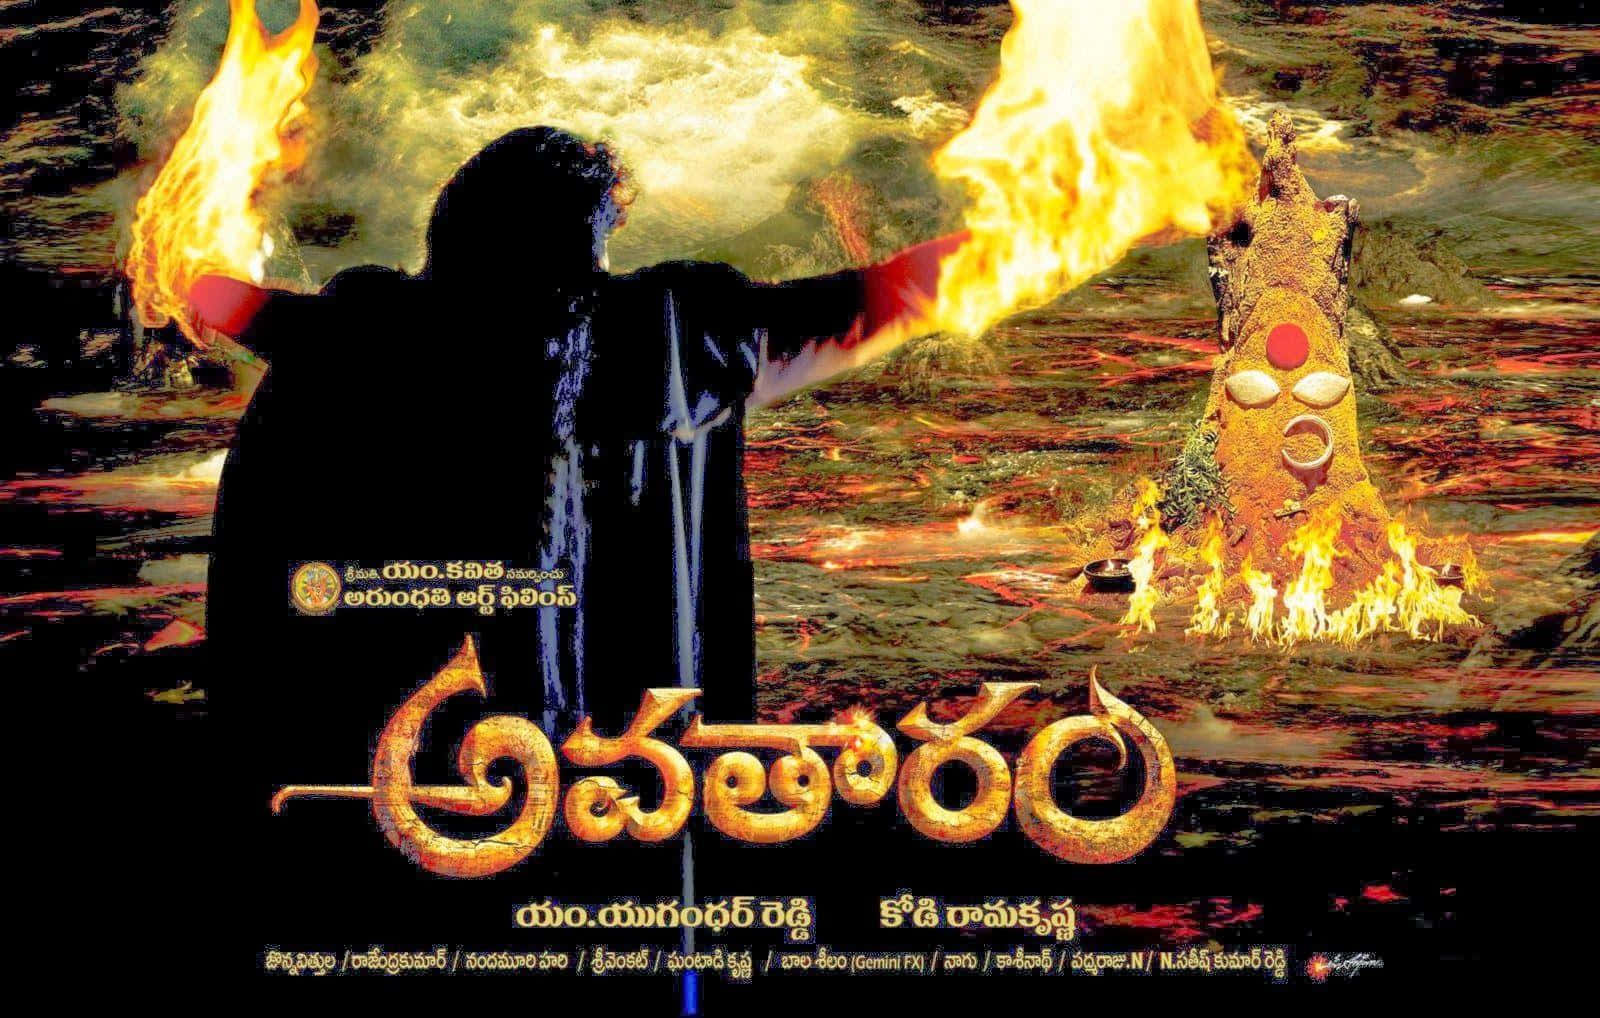 Telugu Movie Poster With A Man Holding A Fire